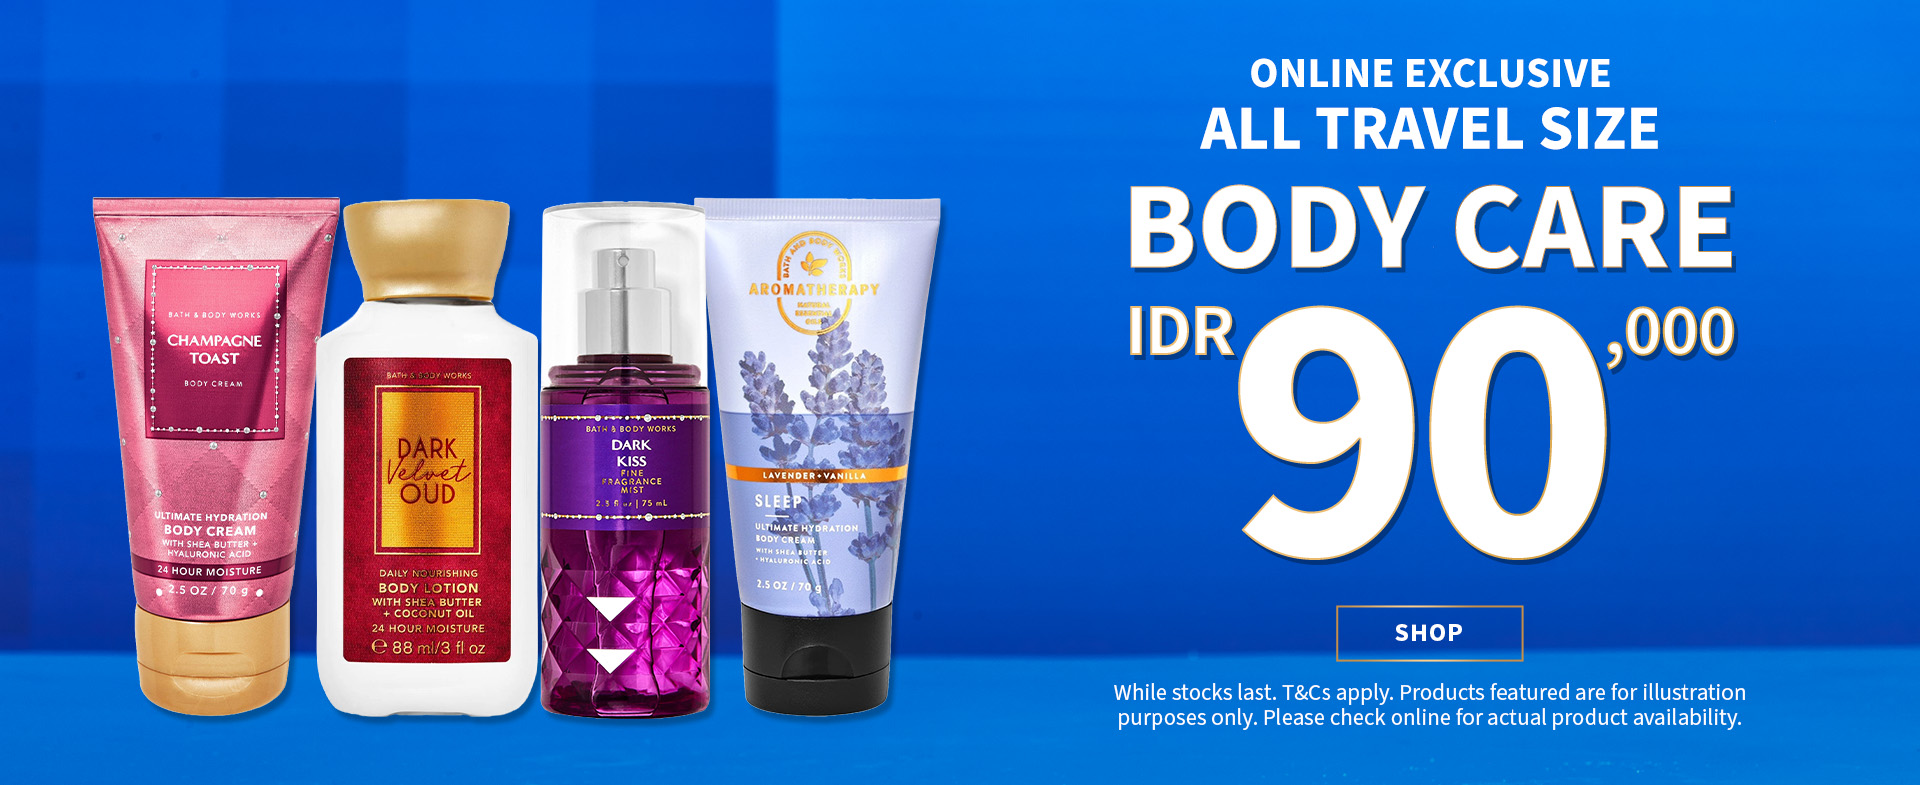 ONLINE EXCLUSIVE! ALL TRAVEL SIZE BODY CARE $$